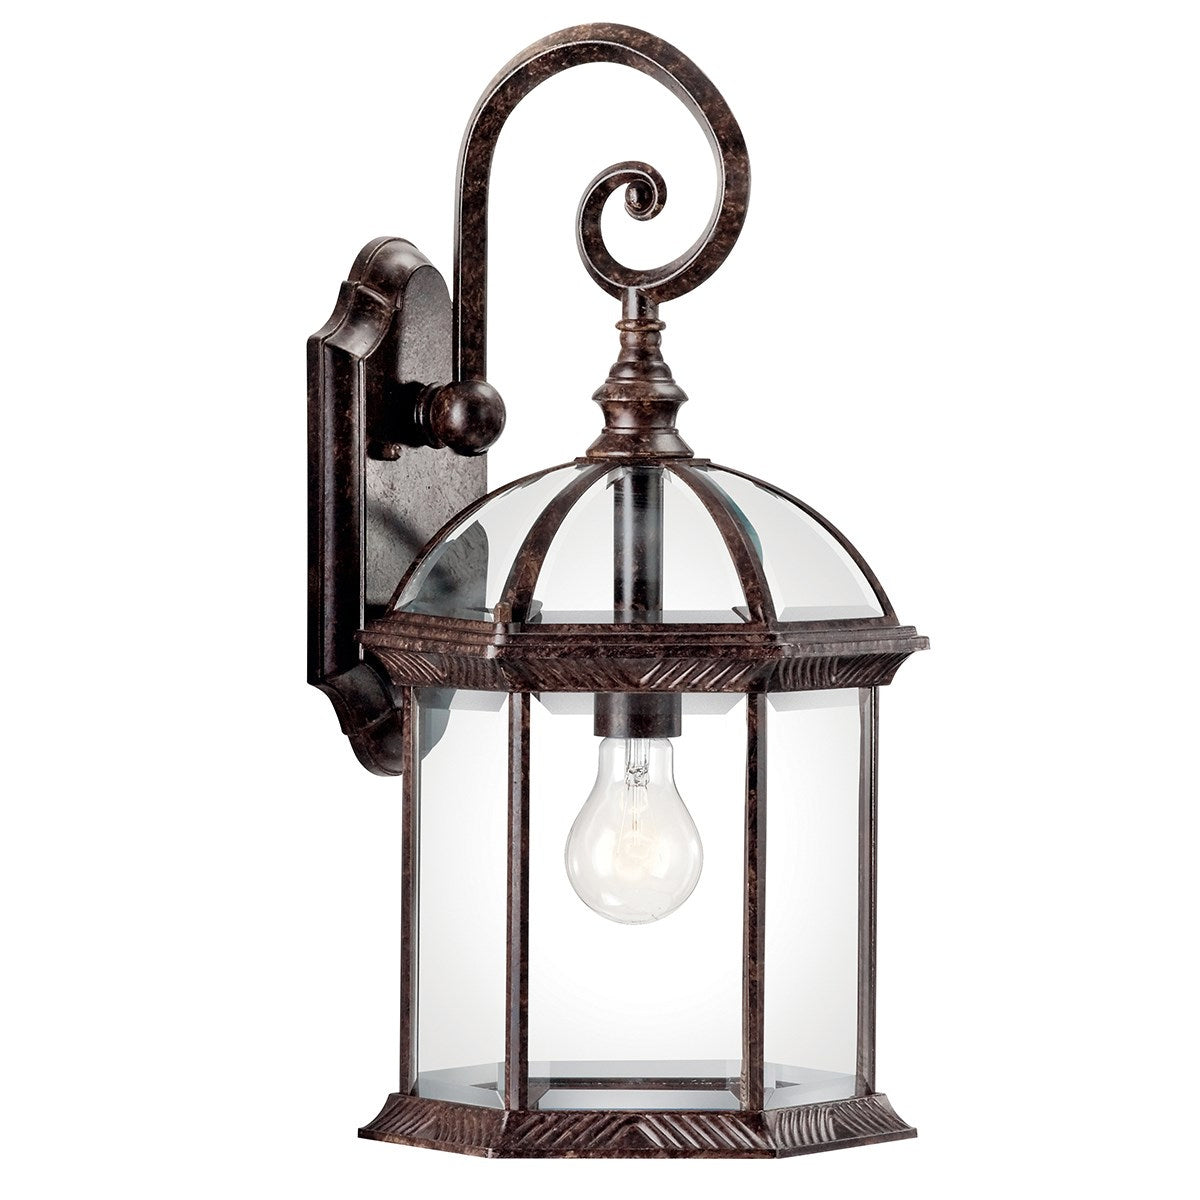 Kichler Canada - LED Outdoor Wall Mount - Barrie - Tannery Bronze- Union Lighting Luminaires Decor